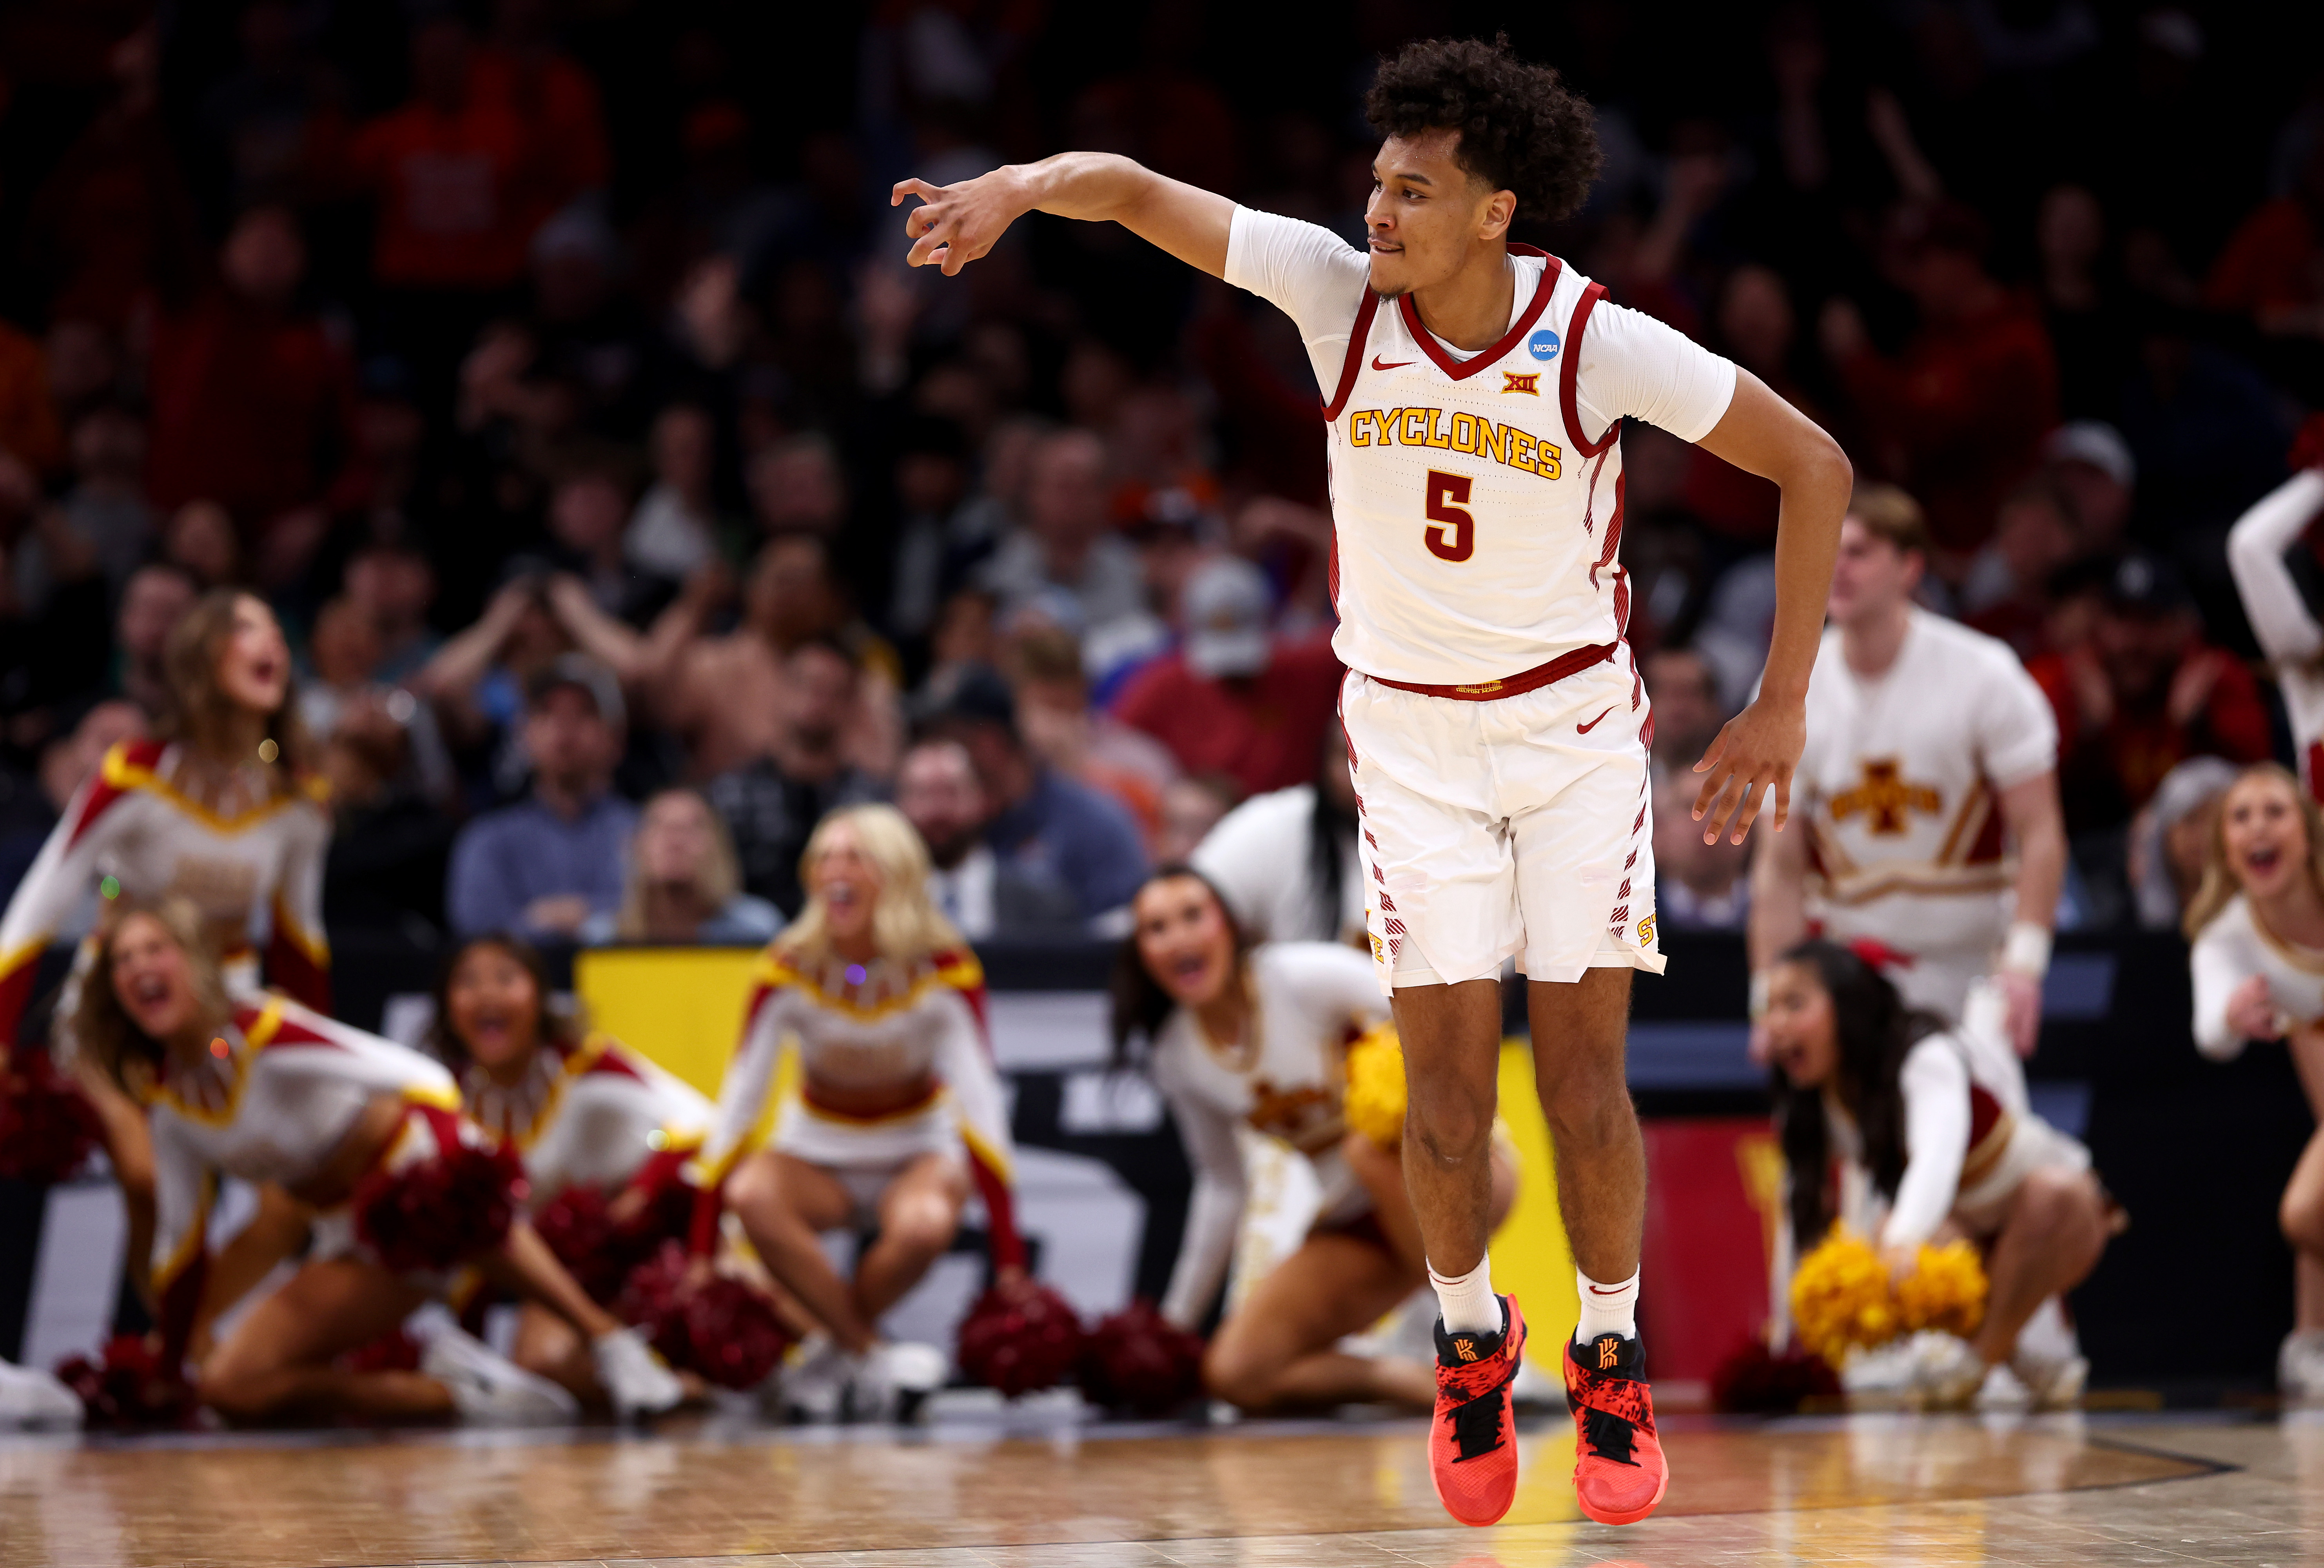 BOSTON, MASSACHUSETTS - MARCH 28: Curtis Jones #5 of the Iowa State Cyclones celebrates against the Illinois Fighting Illini during the second half in the Sweet 16 round of the NCAA Men's Basketball Tournament at TD Garden on March 28, 2024 in Boston, Massachusetts. (Photo by Maddie Meyer/Getty Images)